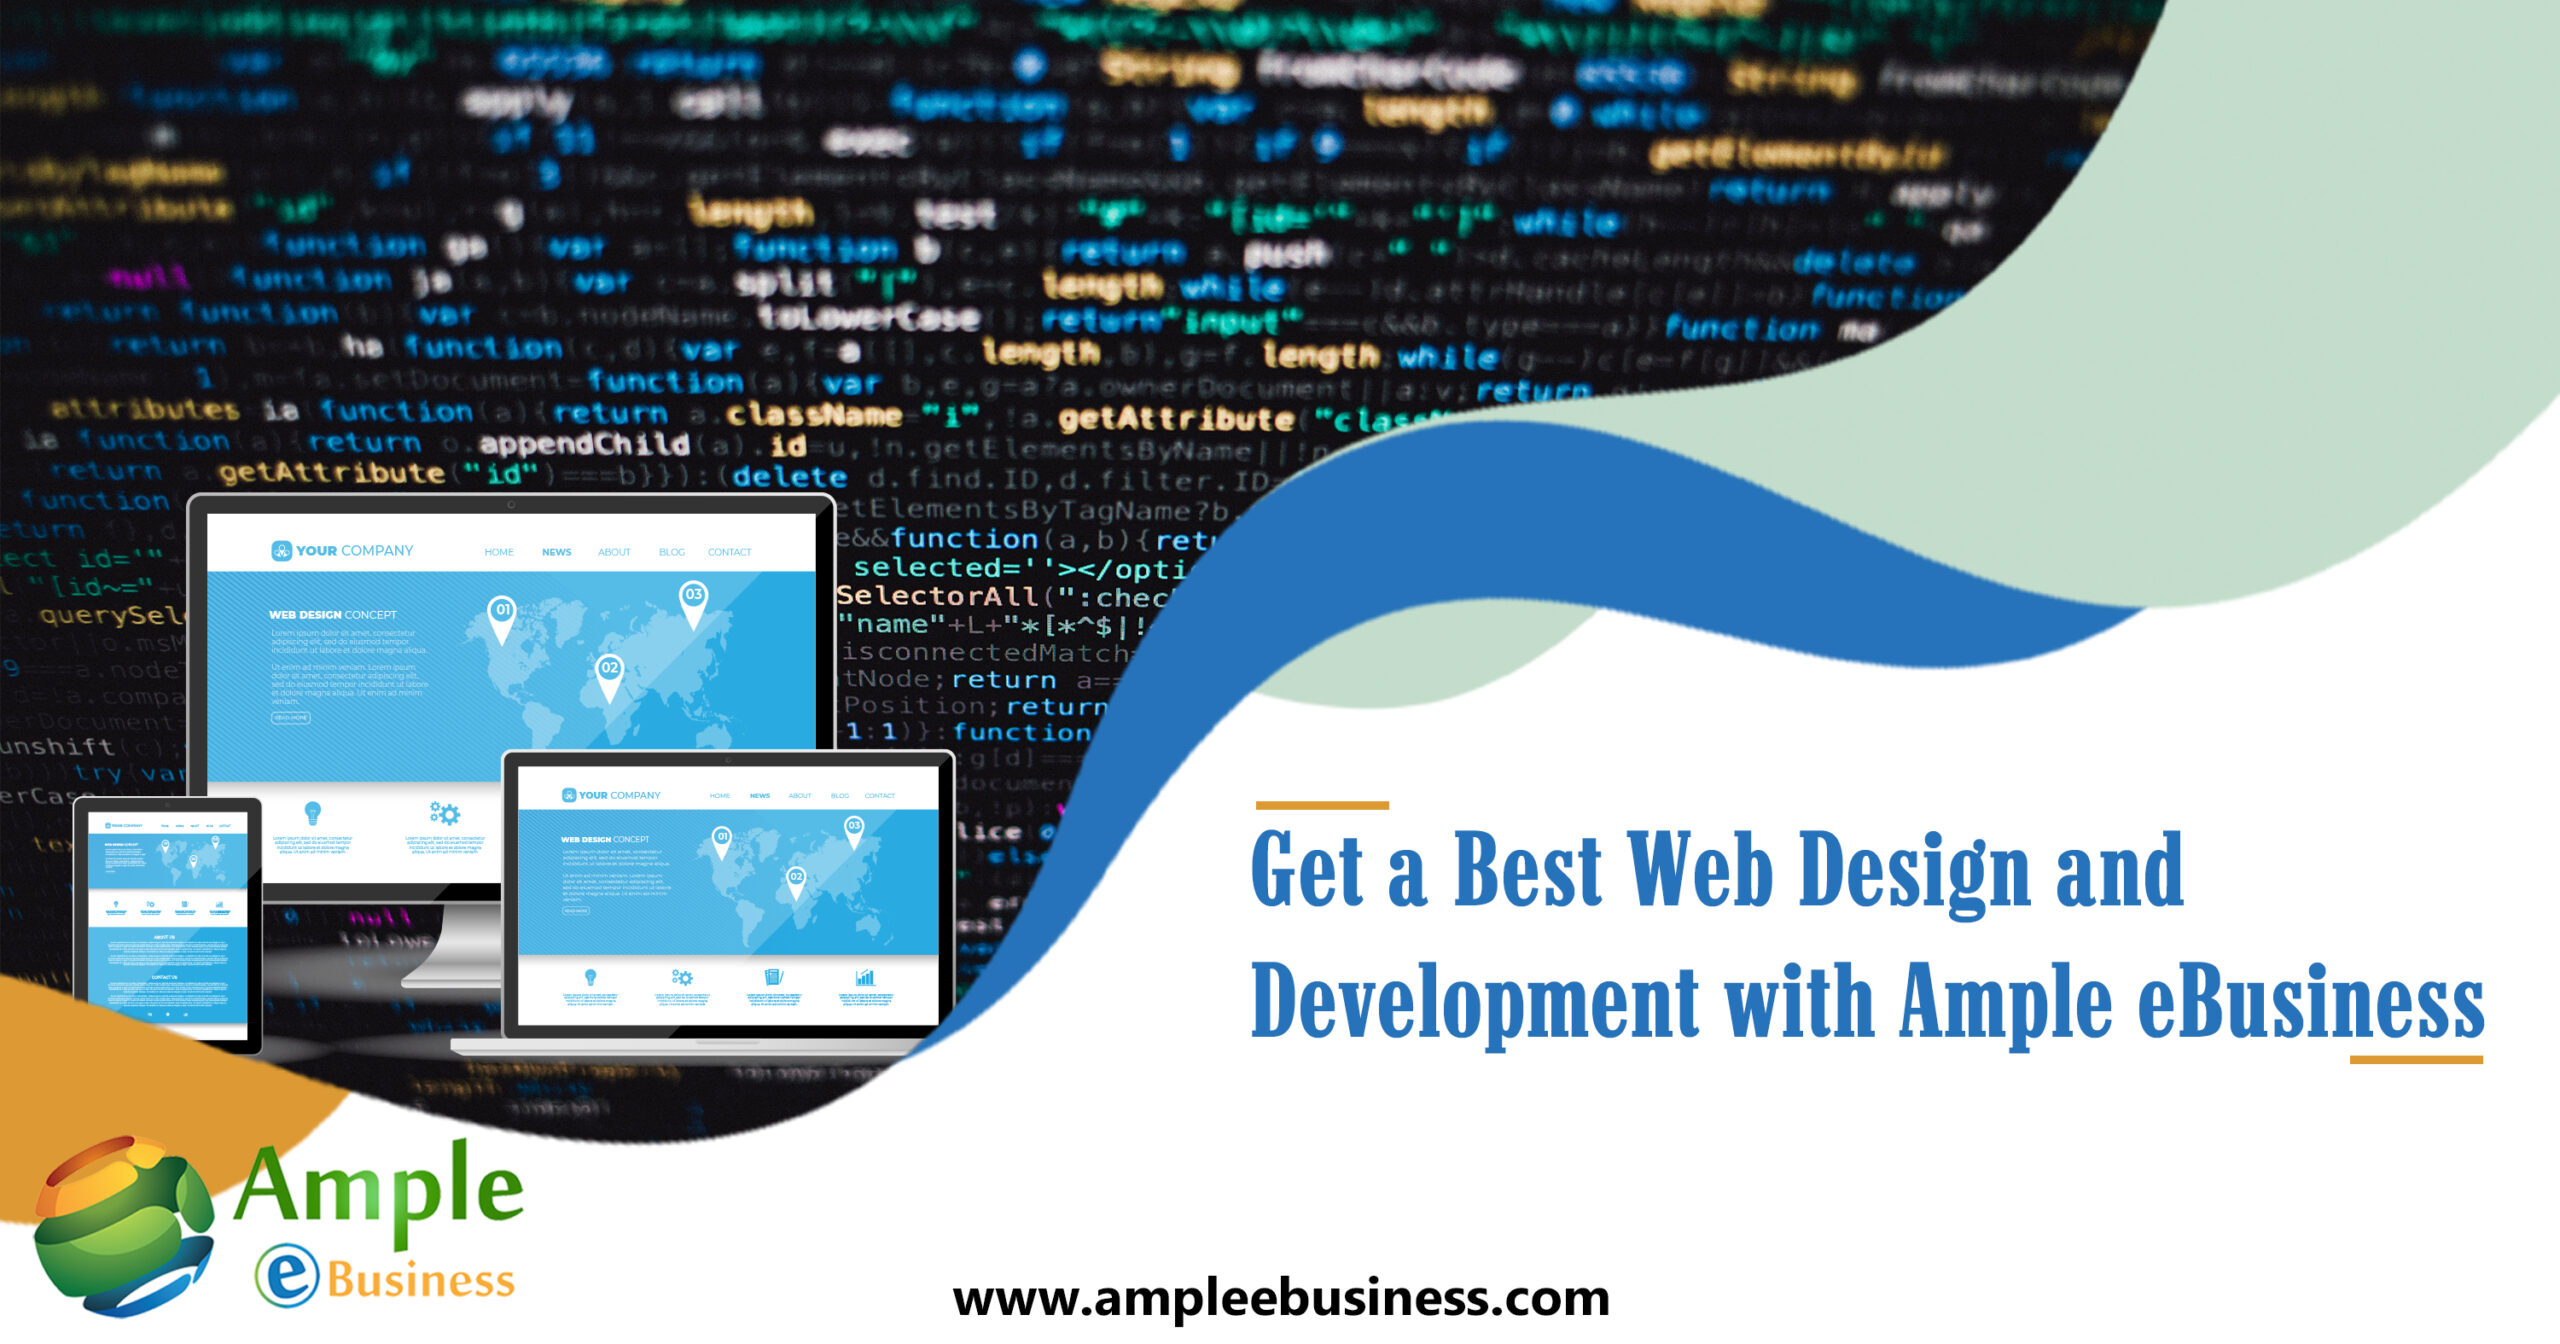 https://www.ampleebusiness.com/wp-content/uploads/2021/08/Important-of-website-design-and-development-scaled.jpg